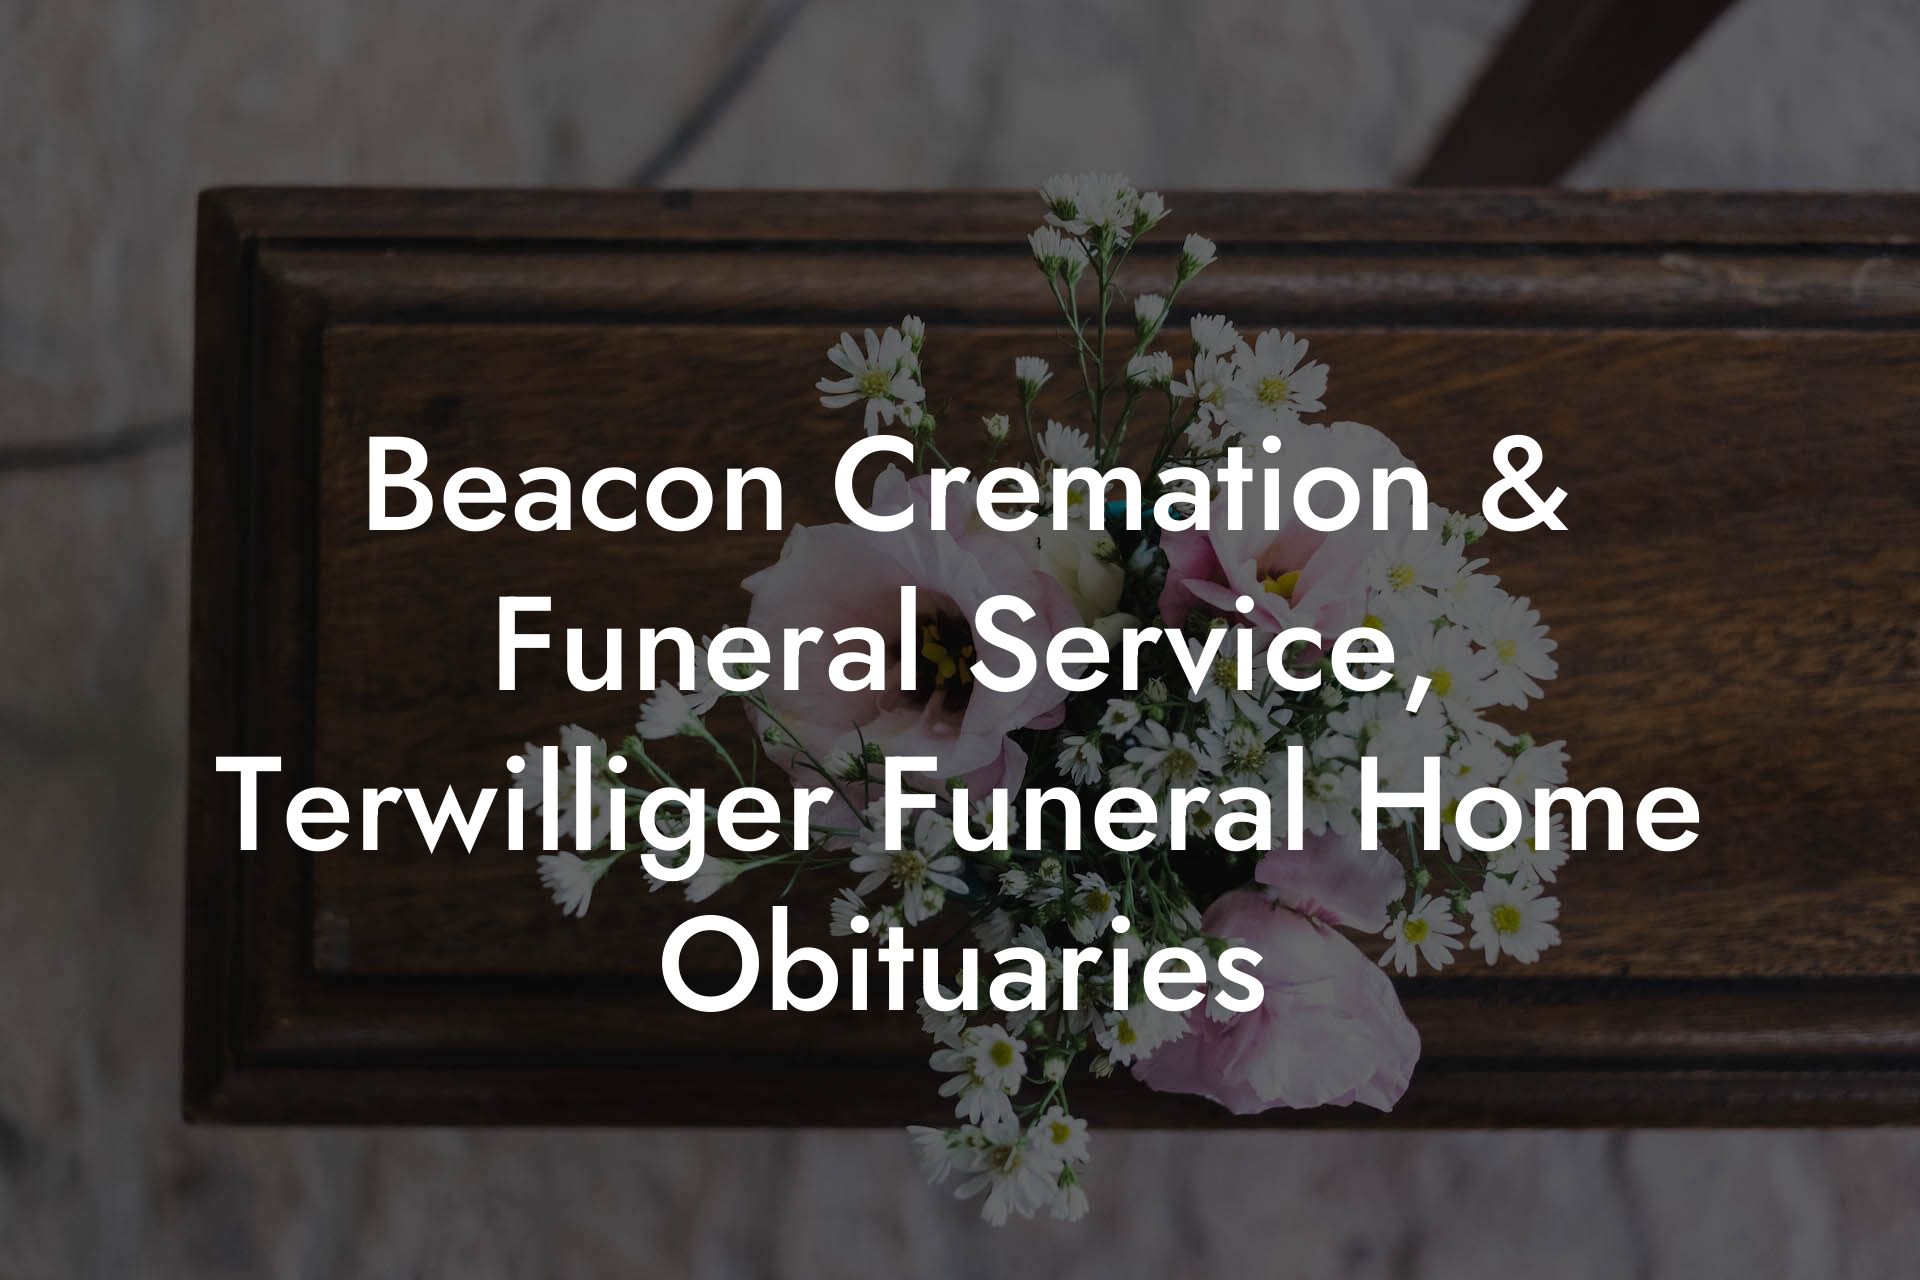 Beacon Cremation & Funeral Service, Terwilliger Funeral Home Obituaries